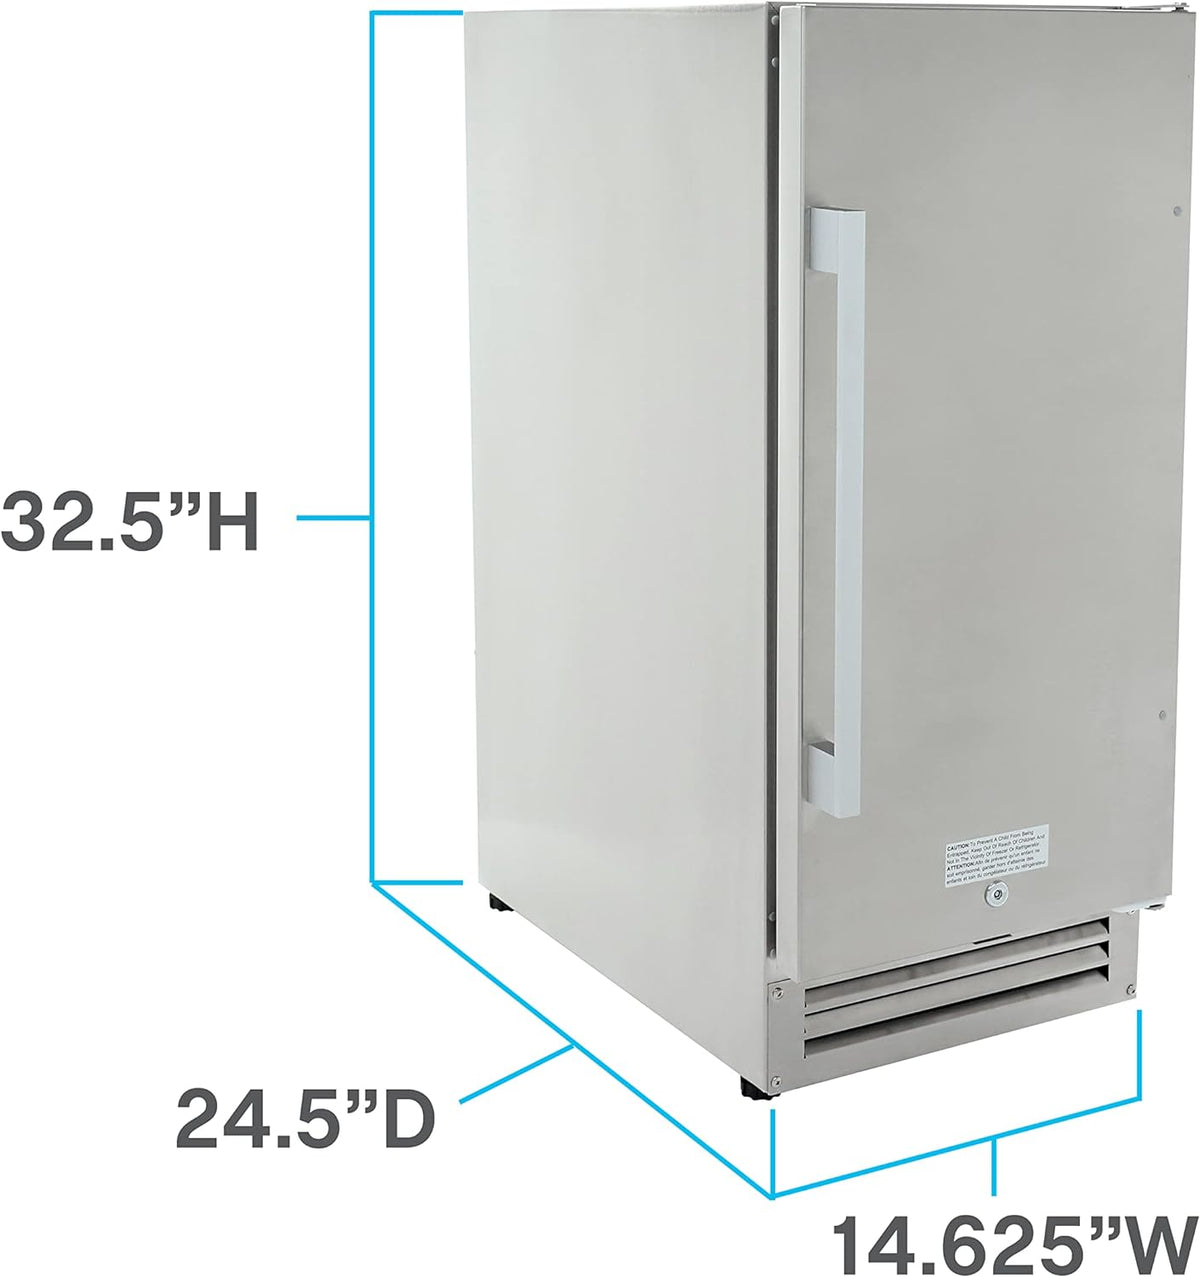 Duura ELITE Series Outdoor Refrigerator in Stainless Steel OR1533U3S | 2.9 cu. ft. Holds 96 Cans, Reversible Door | for Outdoor Kitchens, Patio, Bar, Undercounters, Stays Cool in 100° F